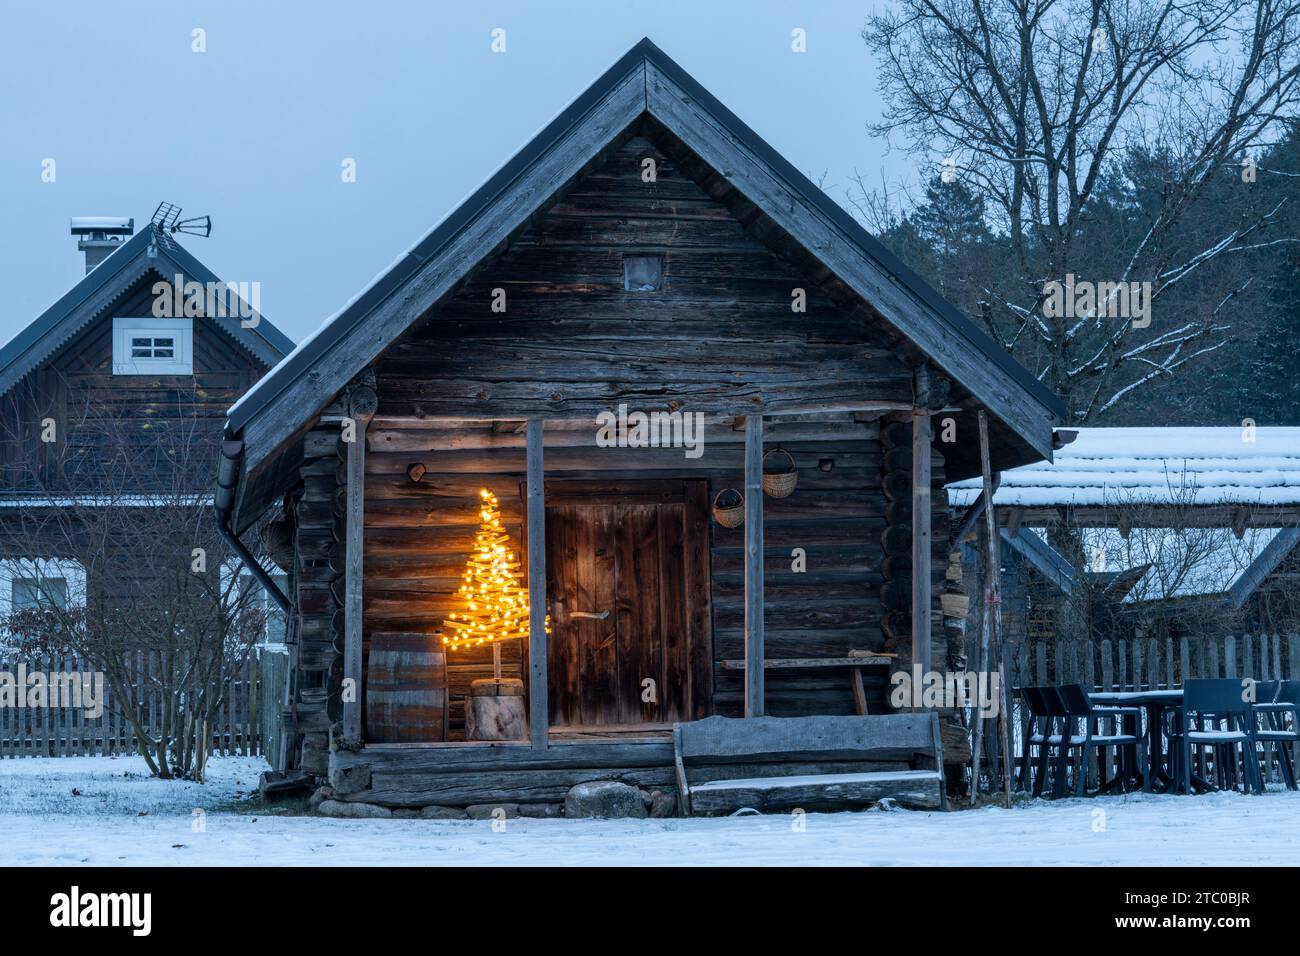 Christmas tree near old house in Lithuanian village Stock Photo